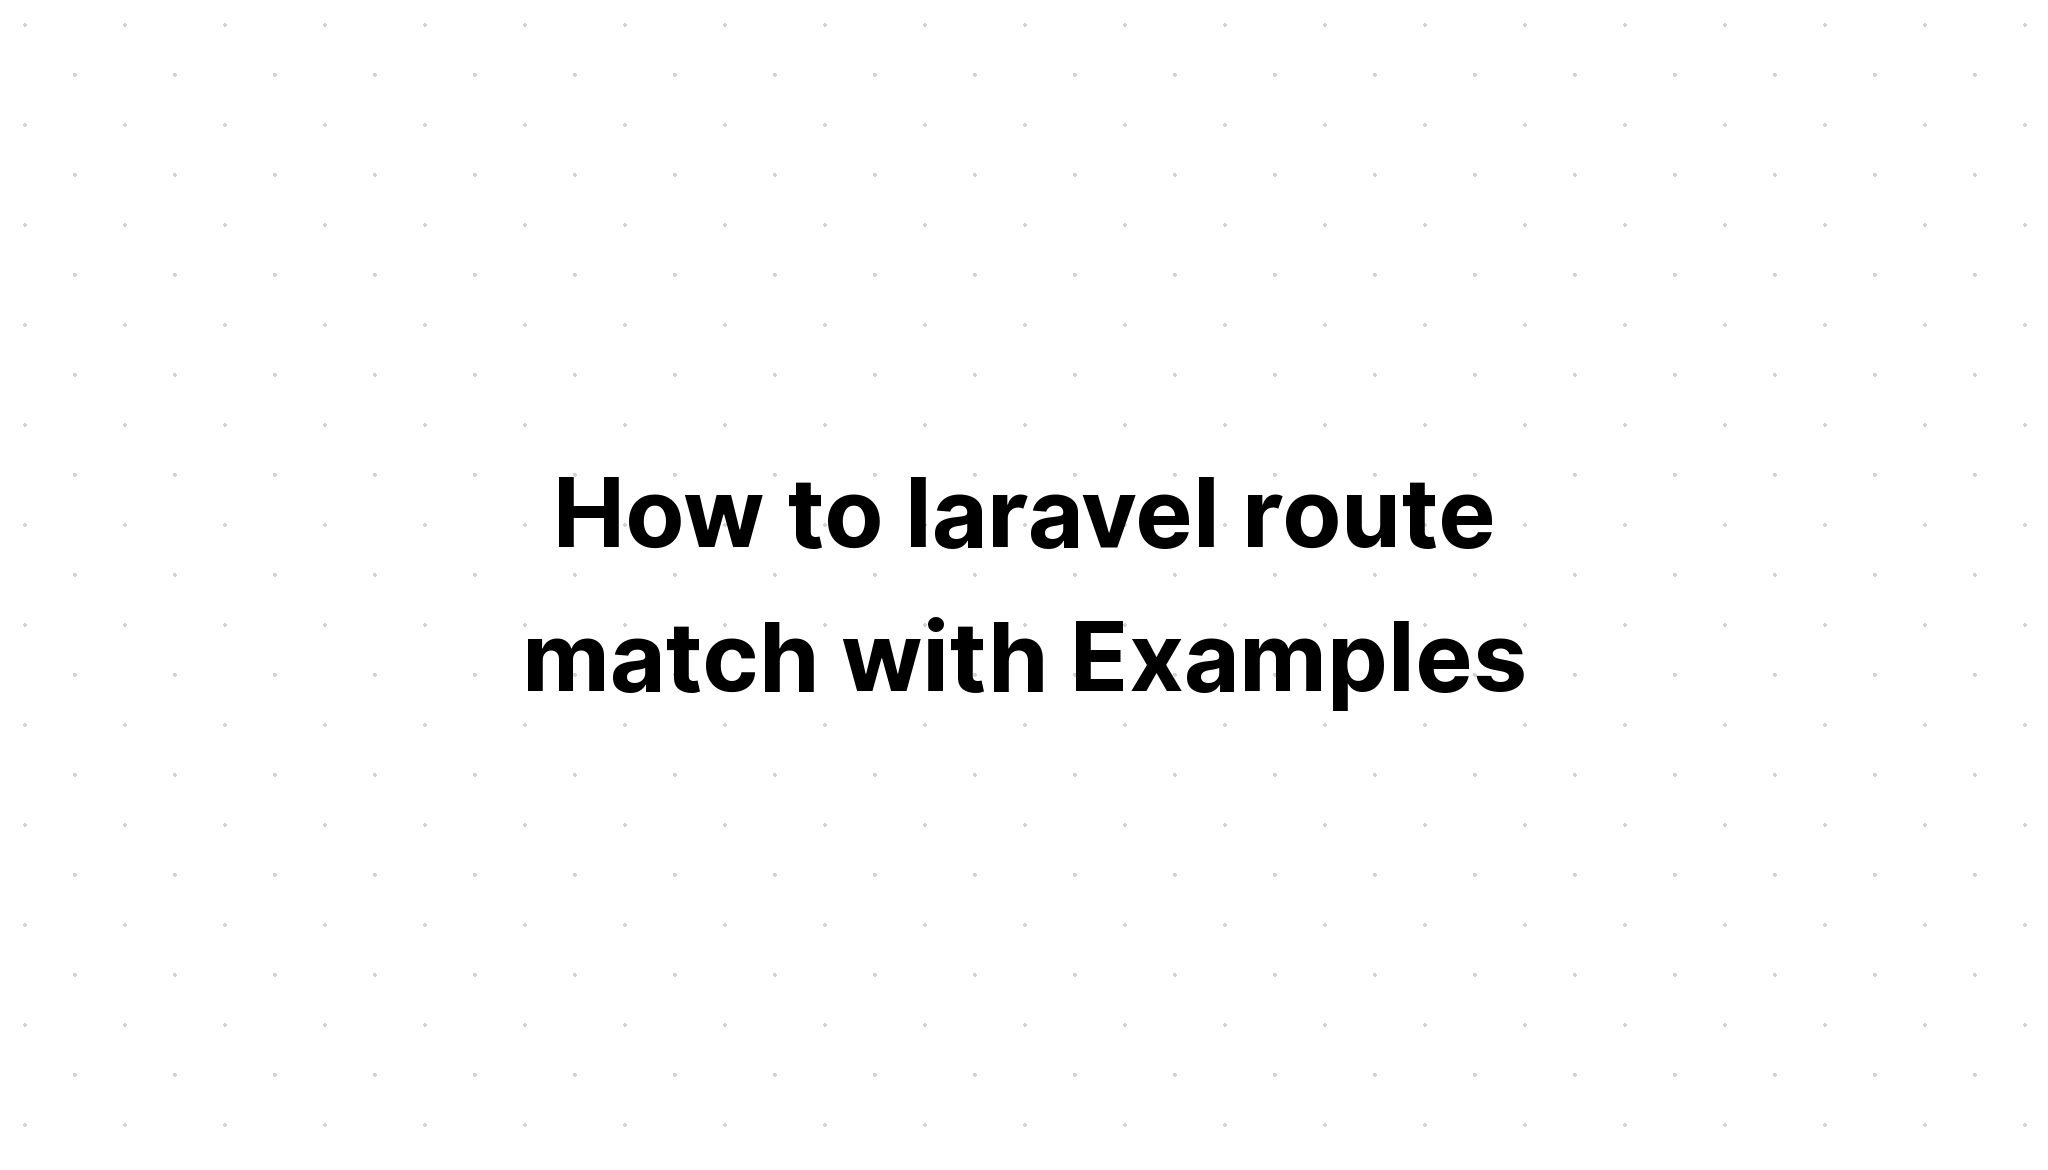 Route matches